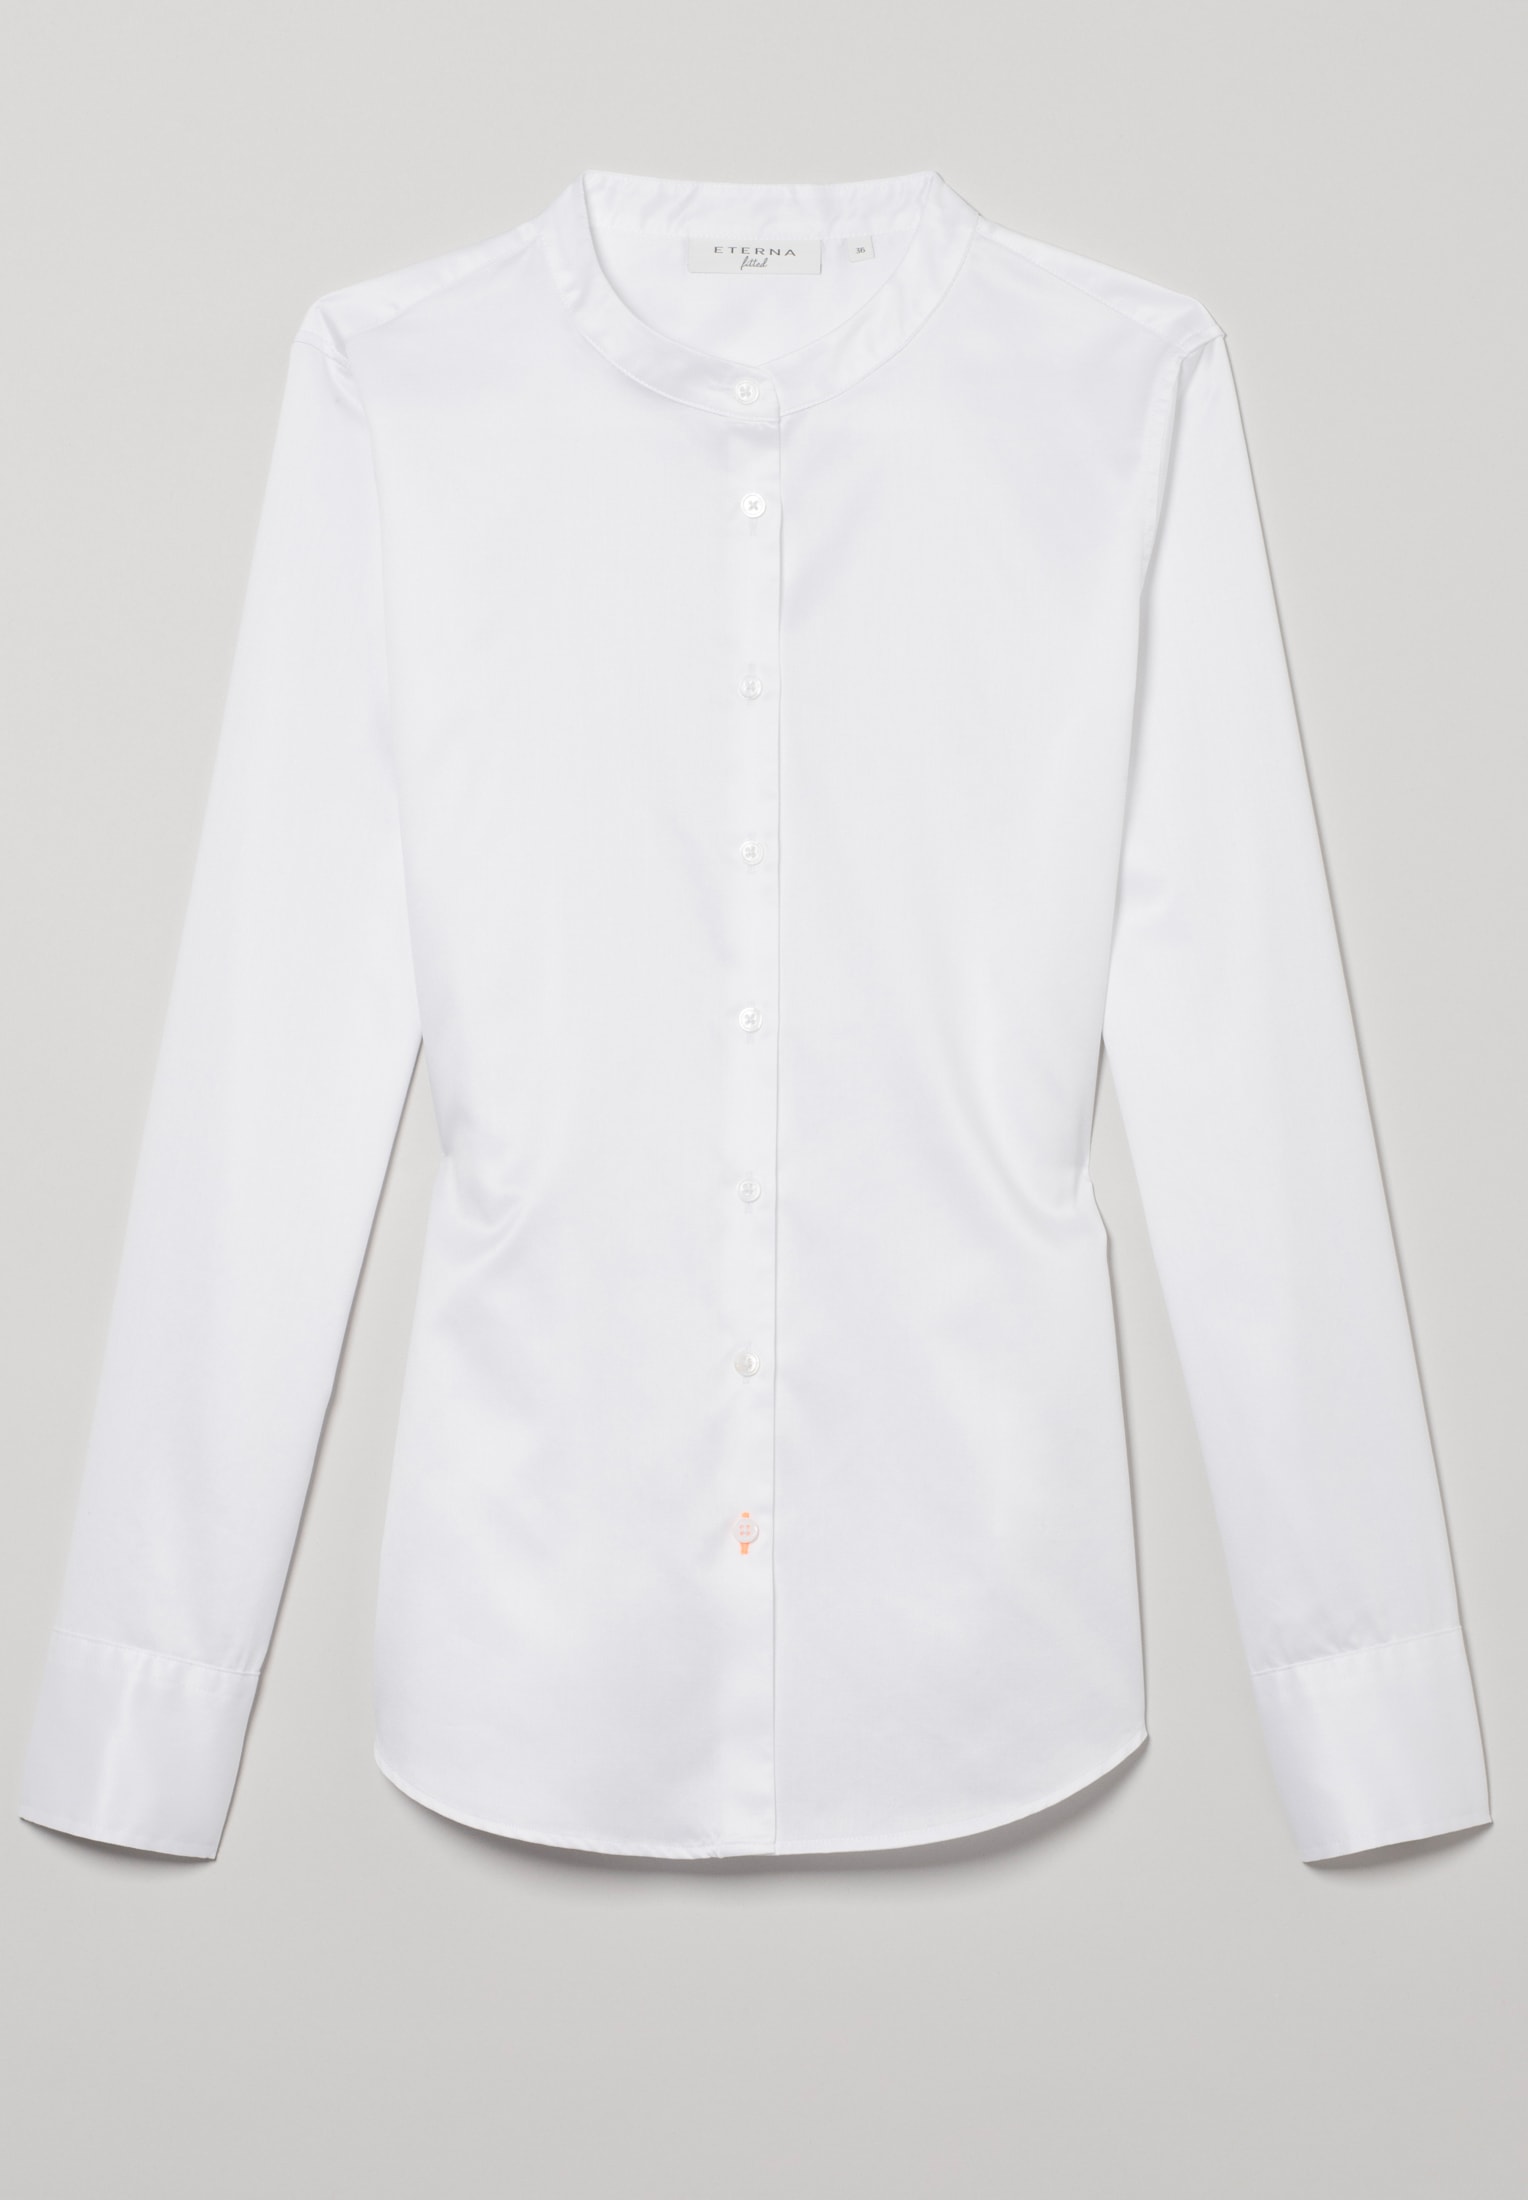 Shirt 38 unifarben Soft | | | Bluse off-white | in Langarm Luxury off-white 2BL03742-00-02-38-1/1